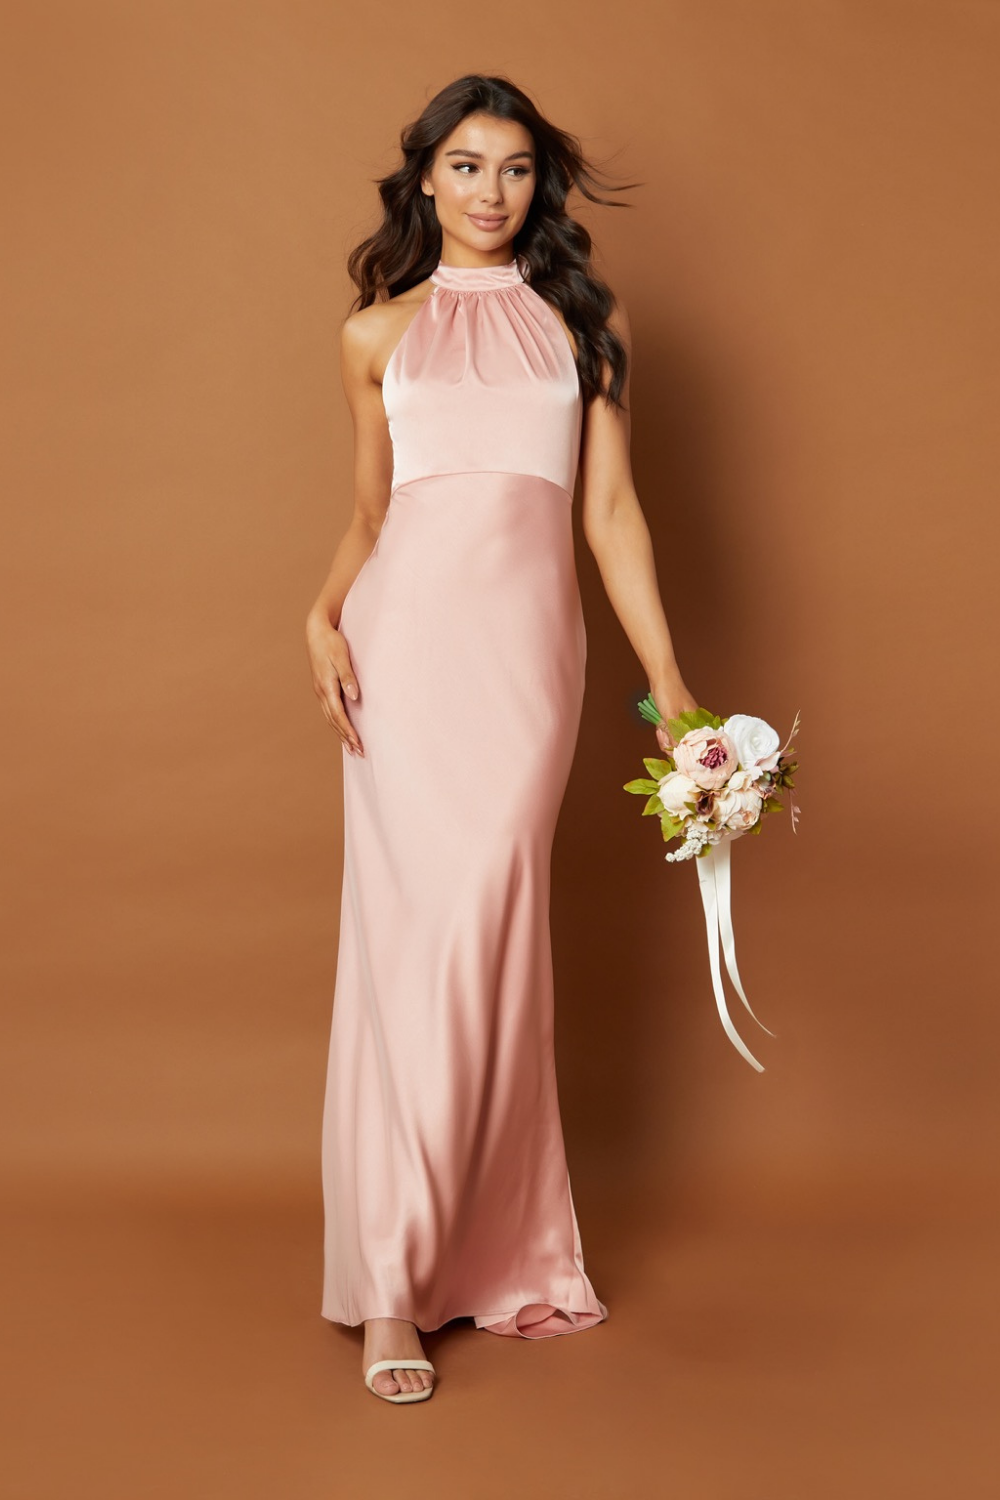 Starlette Halter Neck Maxi Dress with Back Tie and Button Back Detail, UK 8 / US 4 / EU 36 / Blush